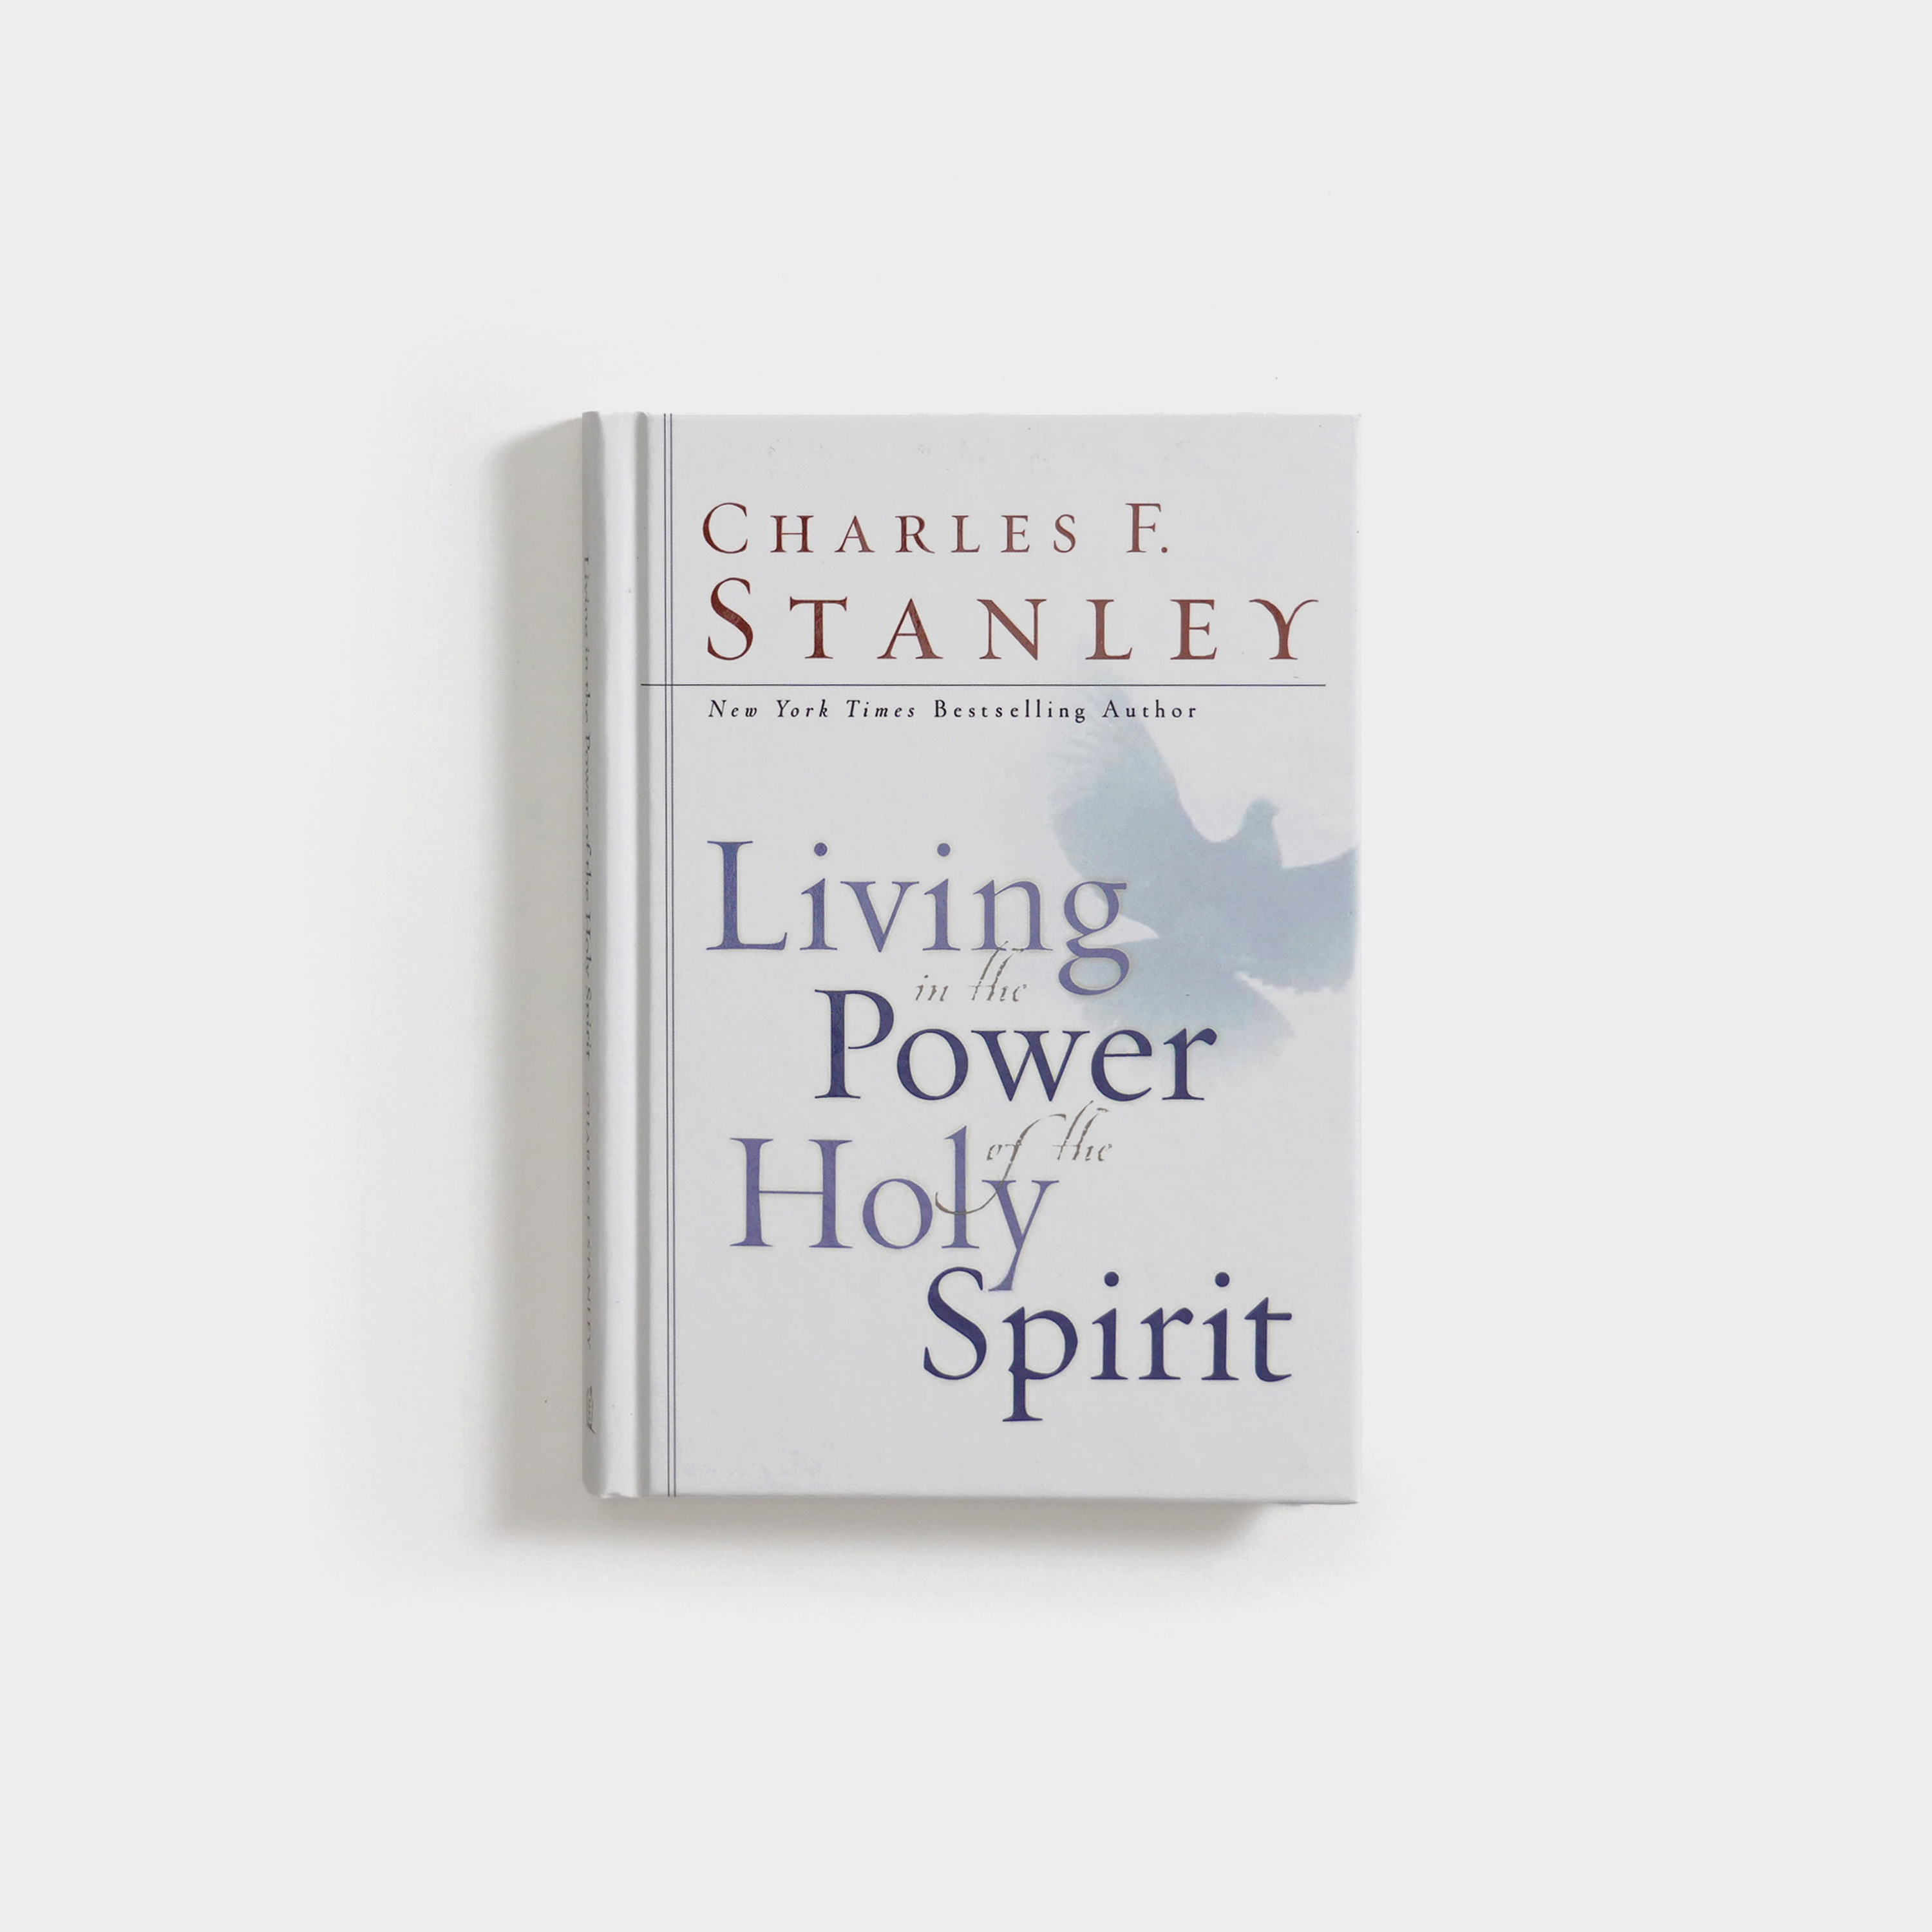 Living in the Power of the Holy Spirit